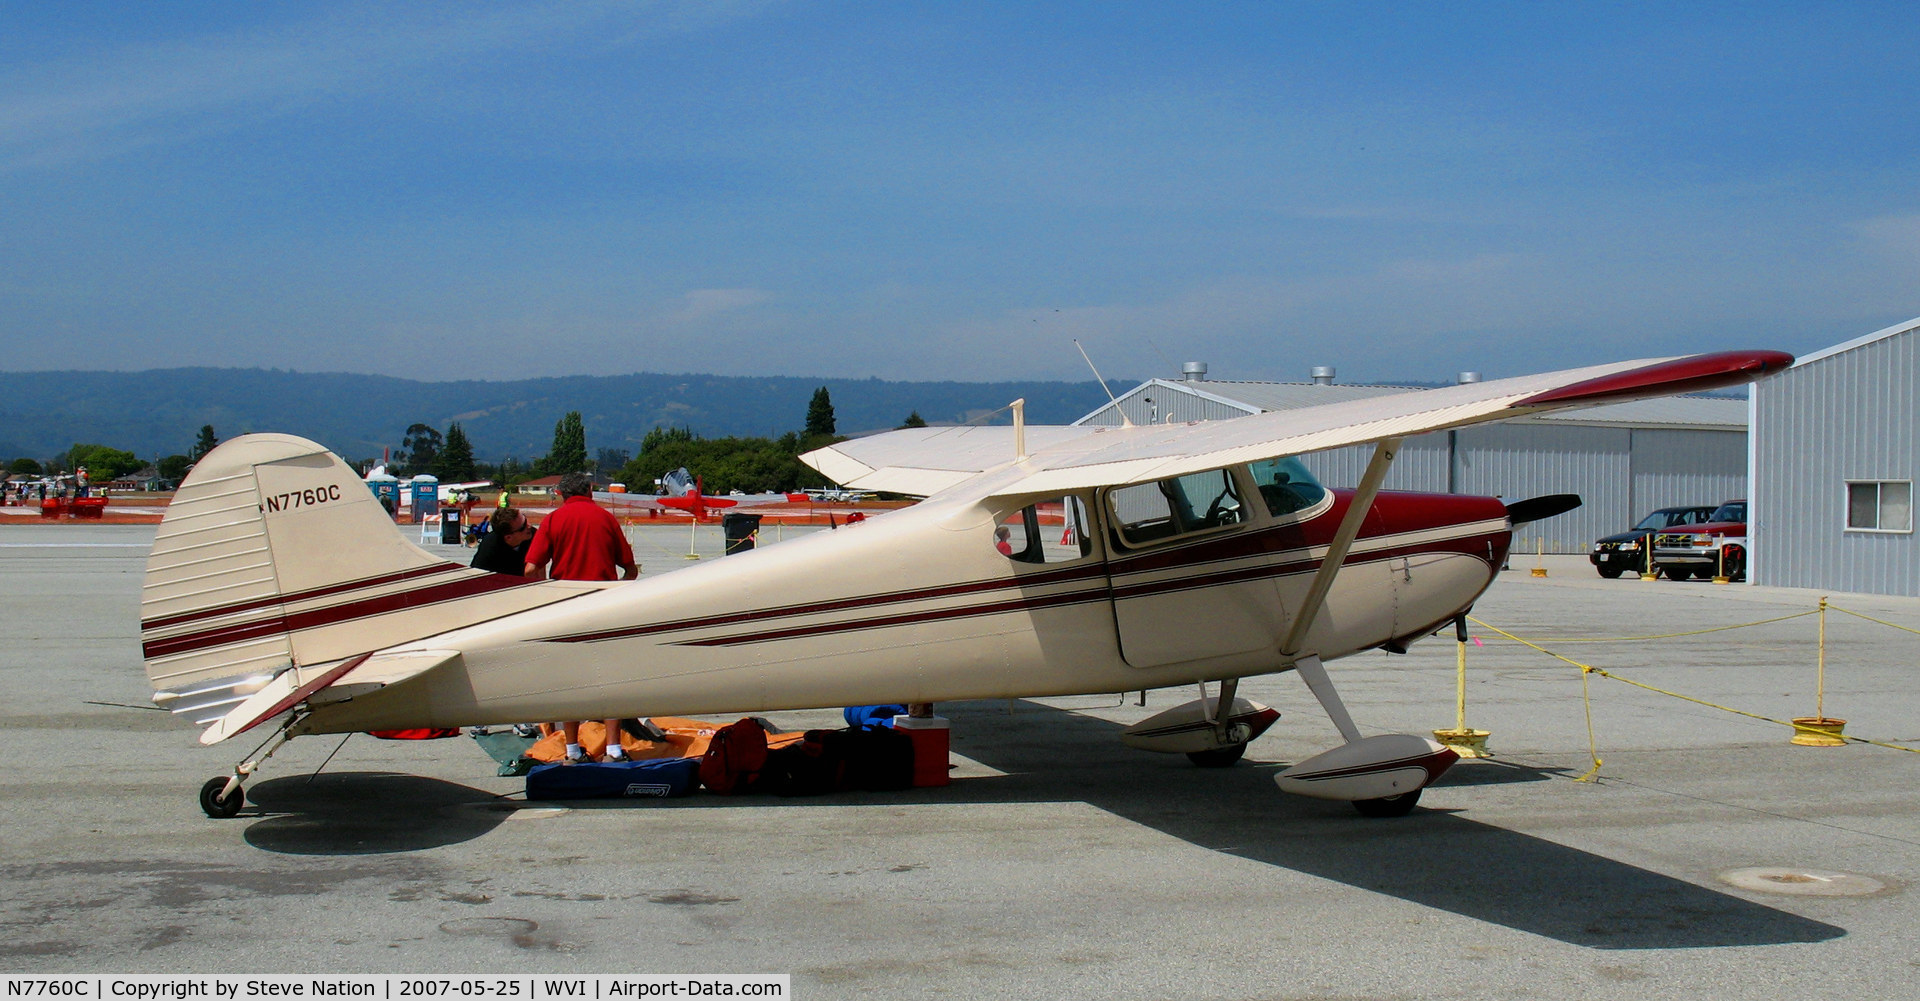 N7760C, Cessna 170B C/N 20520, Recently restored Cessna 170B taxying @ Watsonville, CA airshow